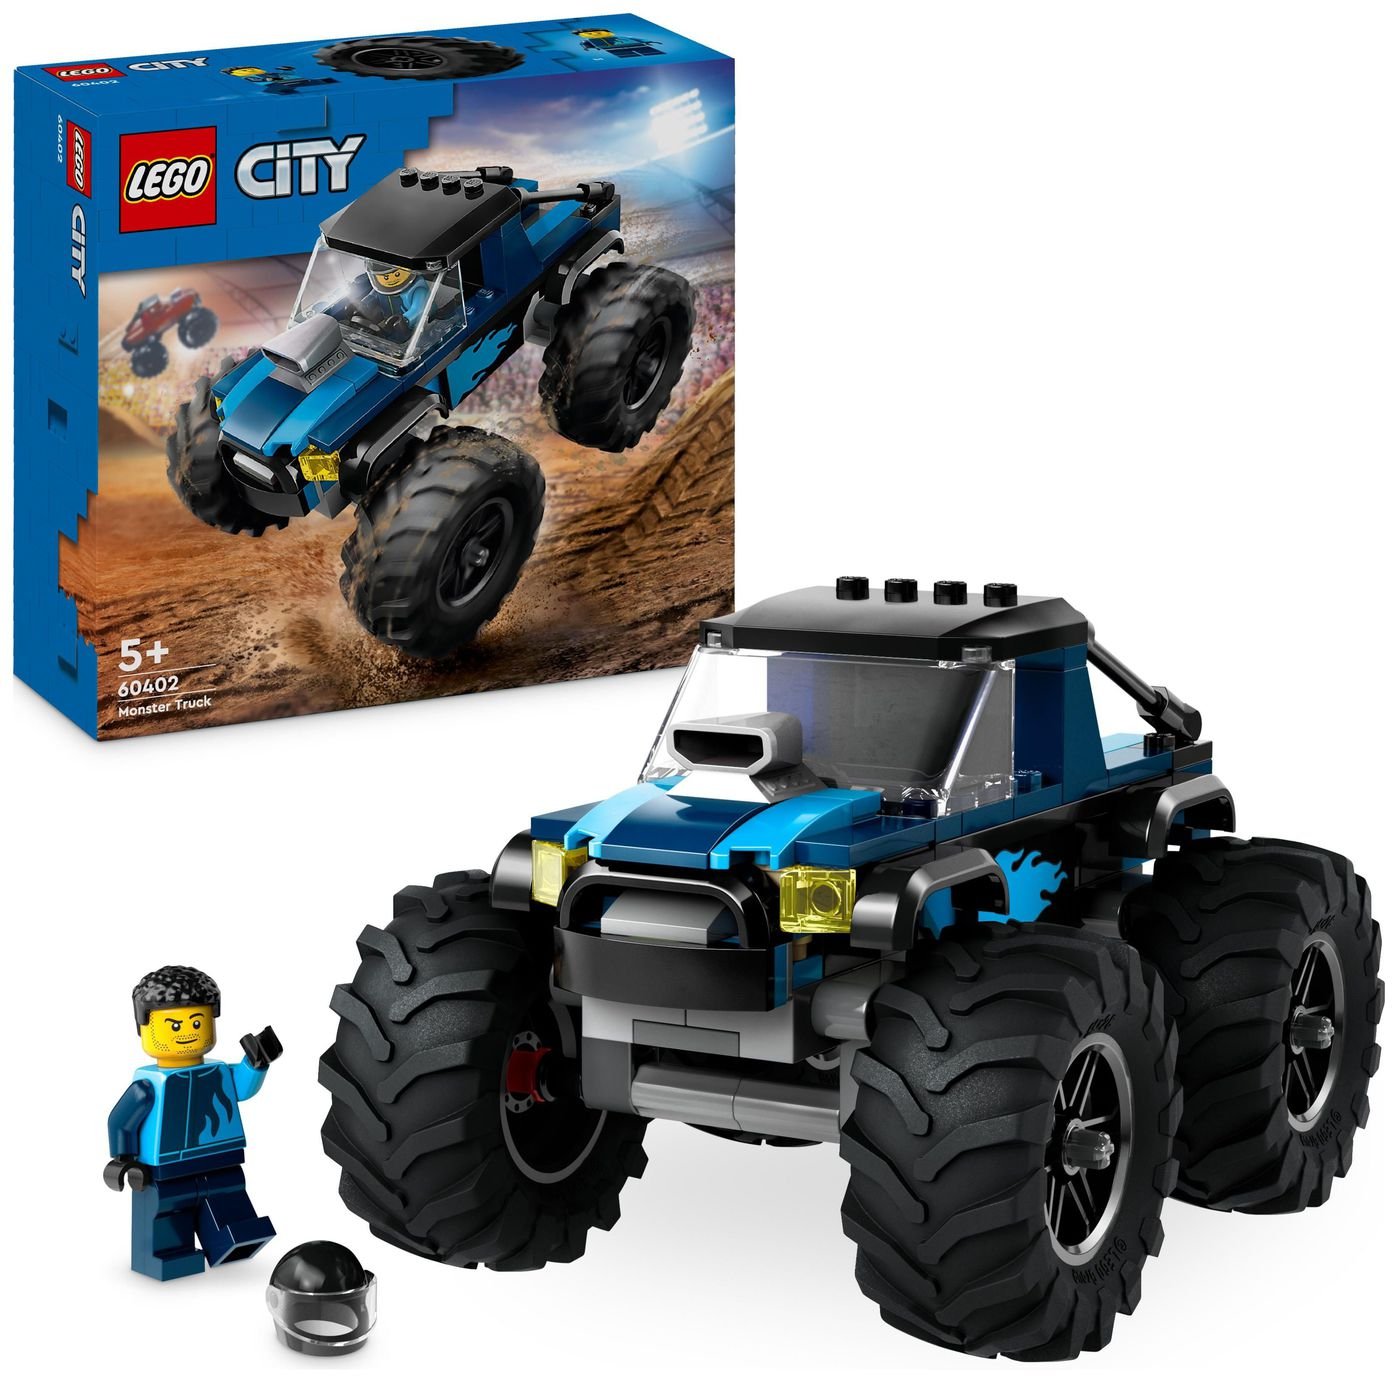 LEGO City Blue Monster Truck Toy Vehicle Playset 60402